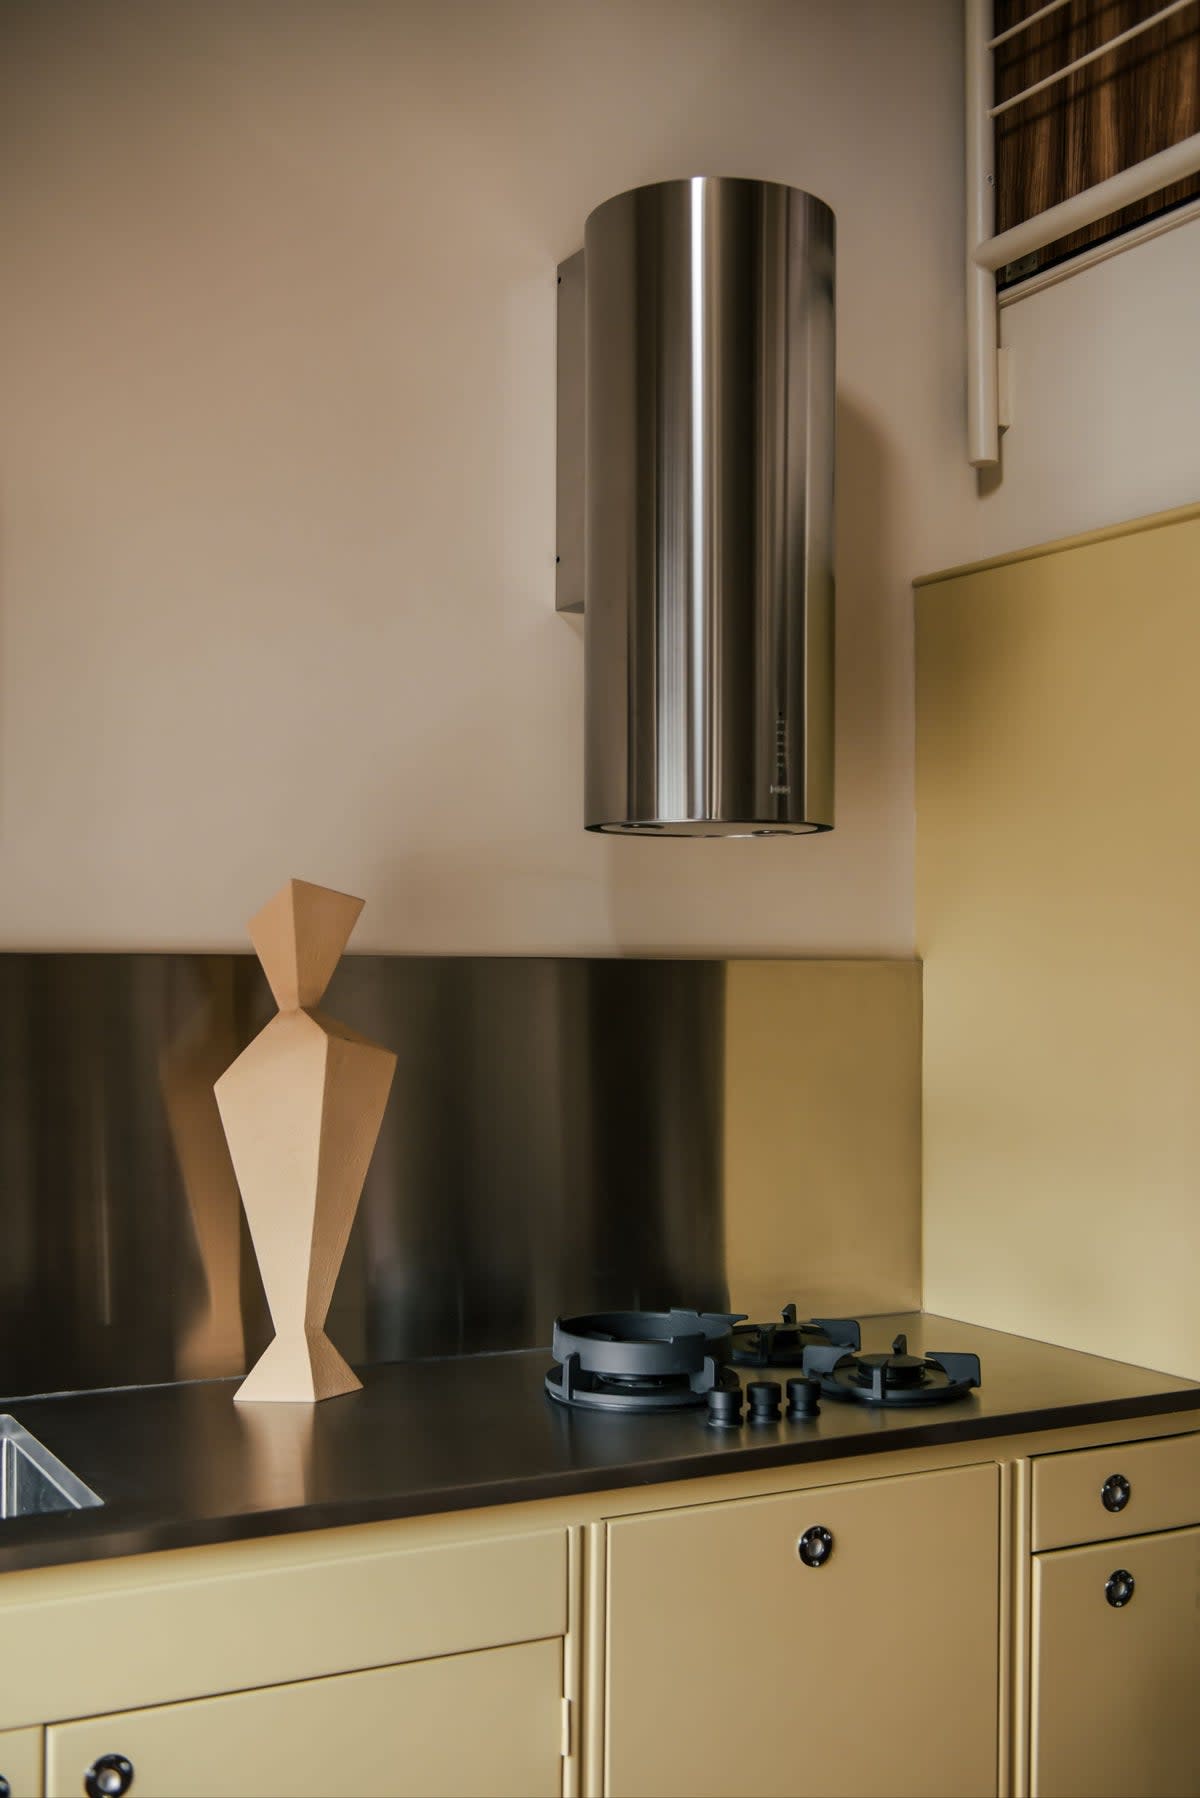 Hollie Bowden installed a stainless steel kitchen in this London apartment (Genevieve Lutkin)